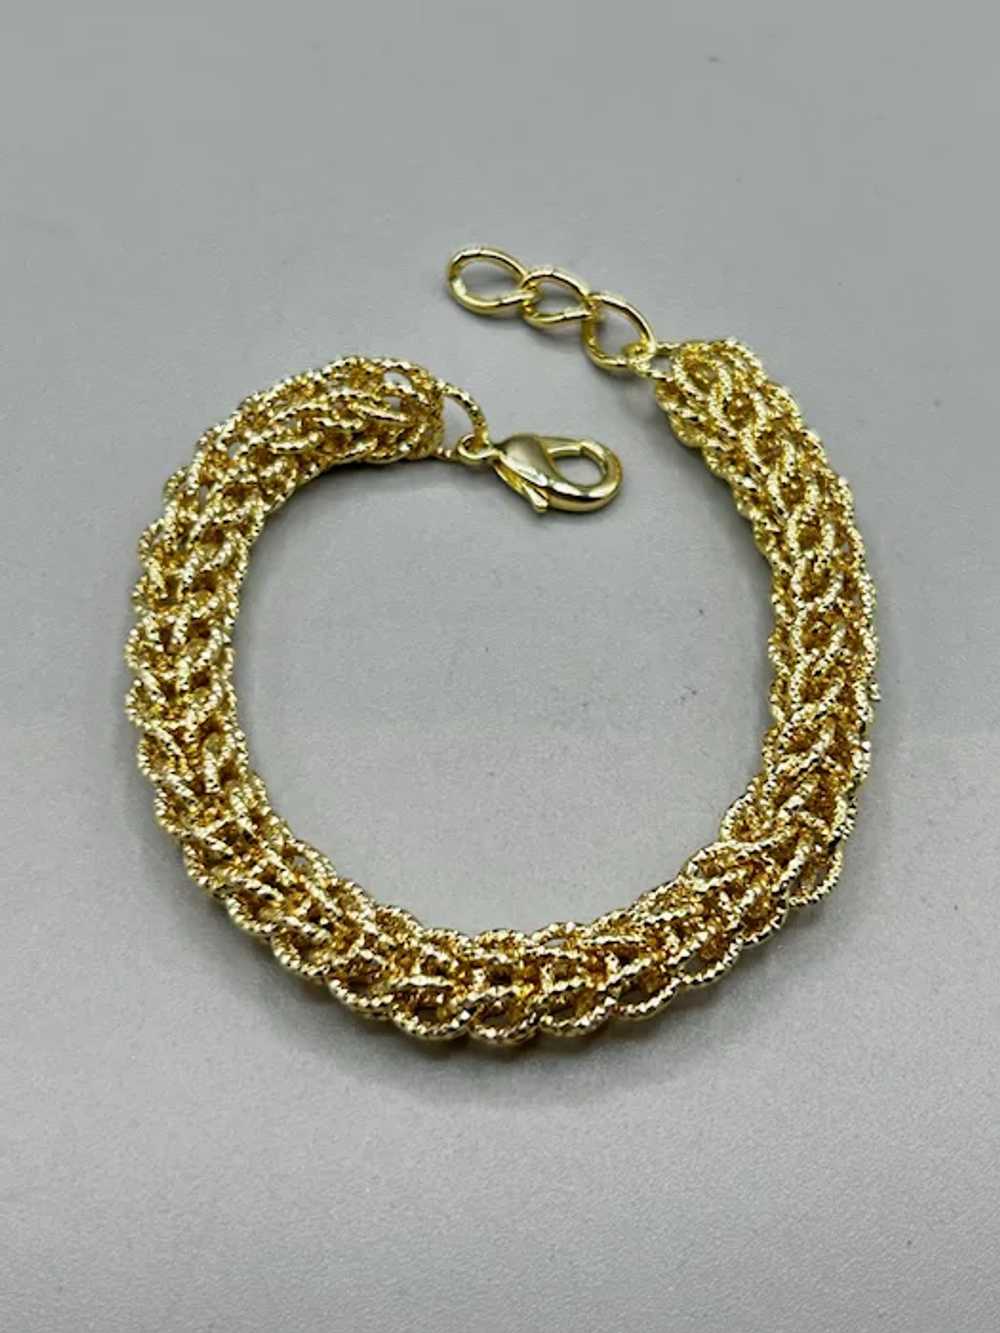 Wheat Chain Bracelet Gold Tone Quality Chain Link… - image 2